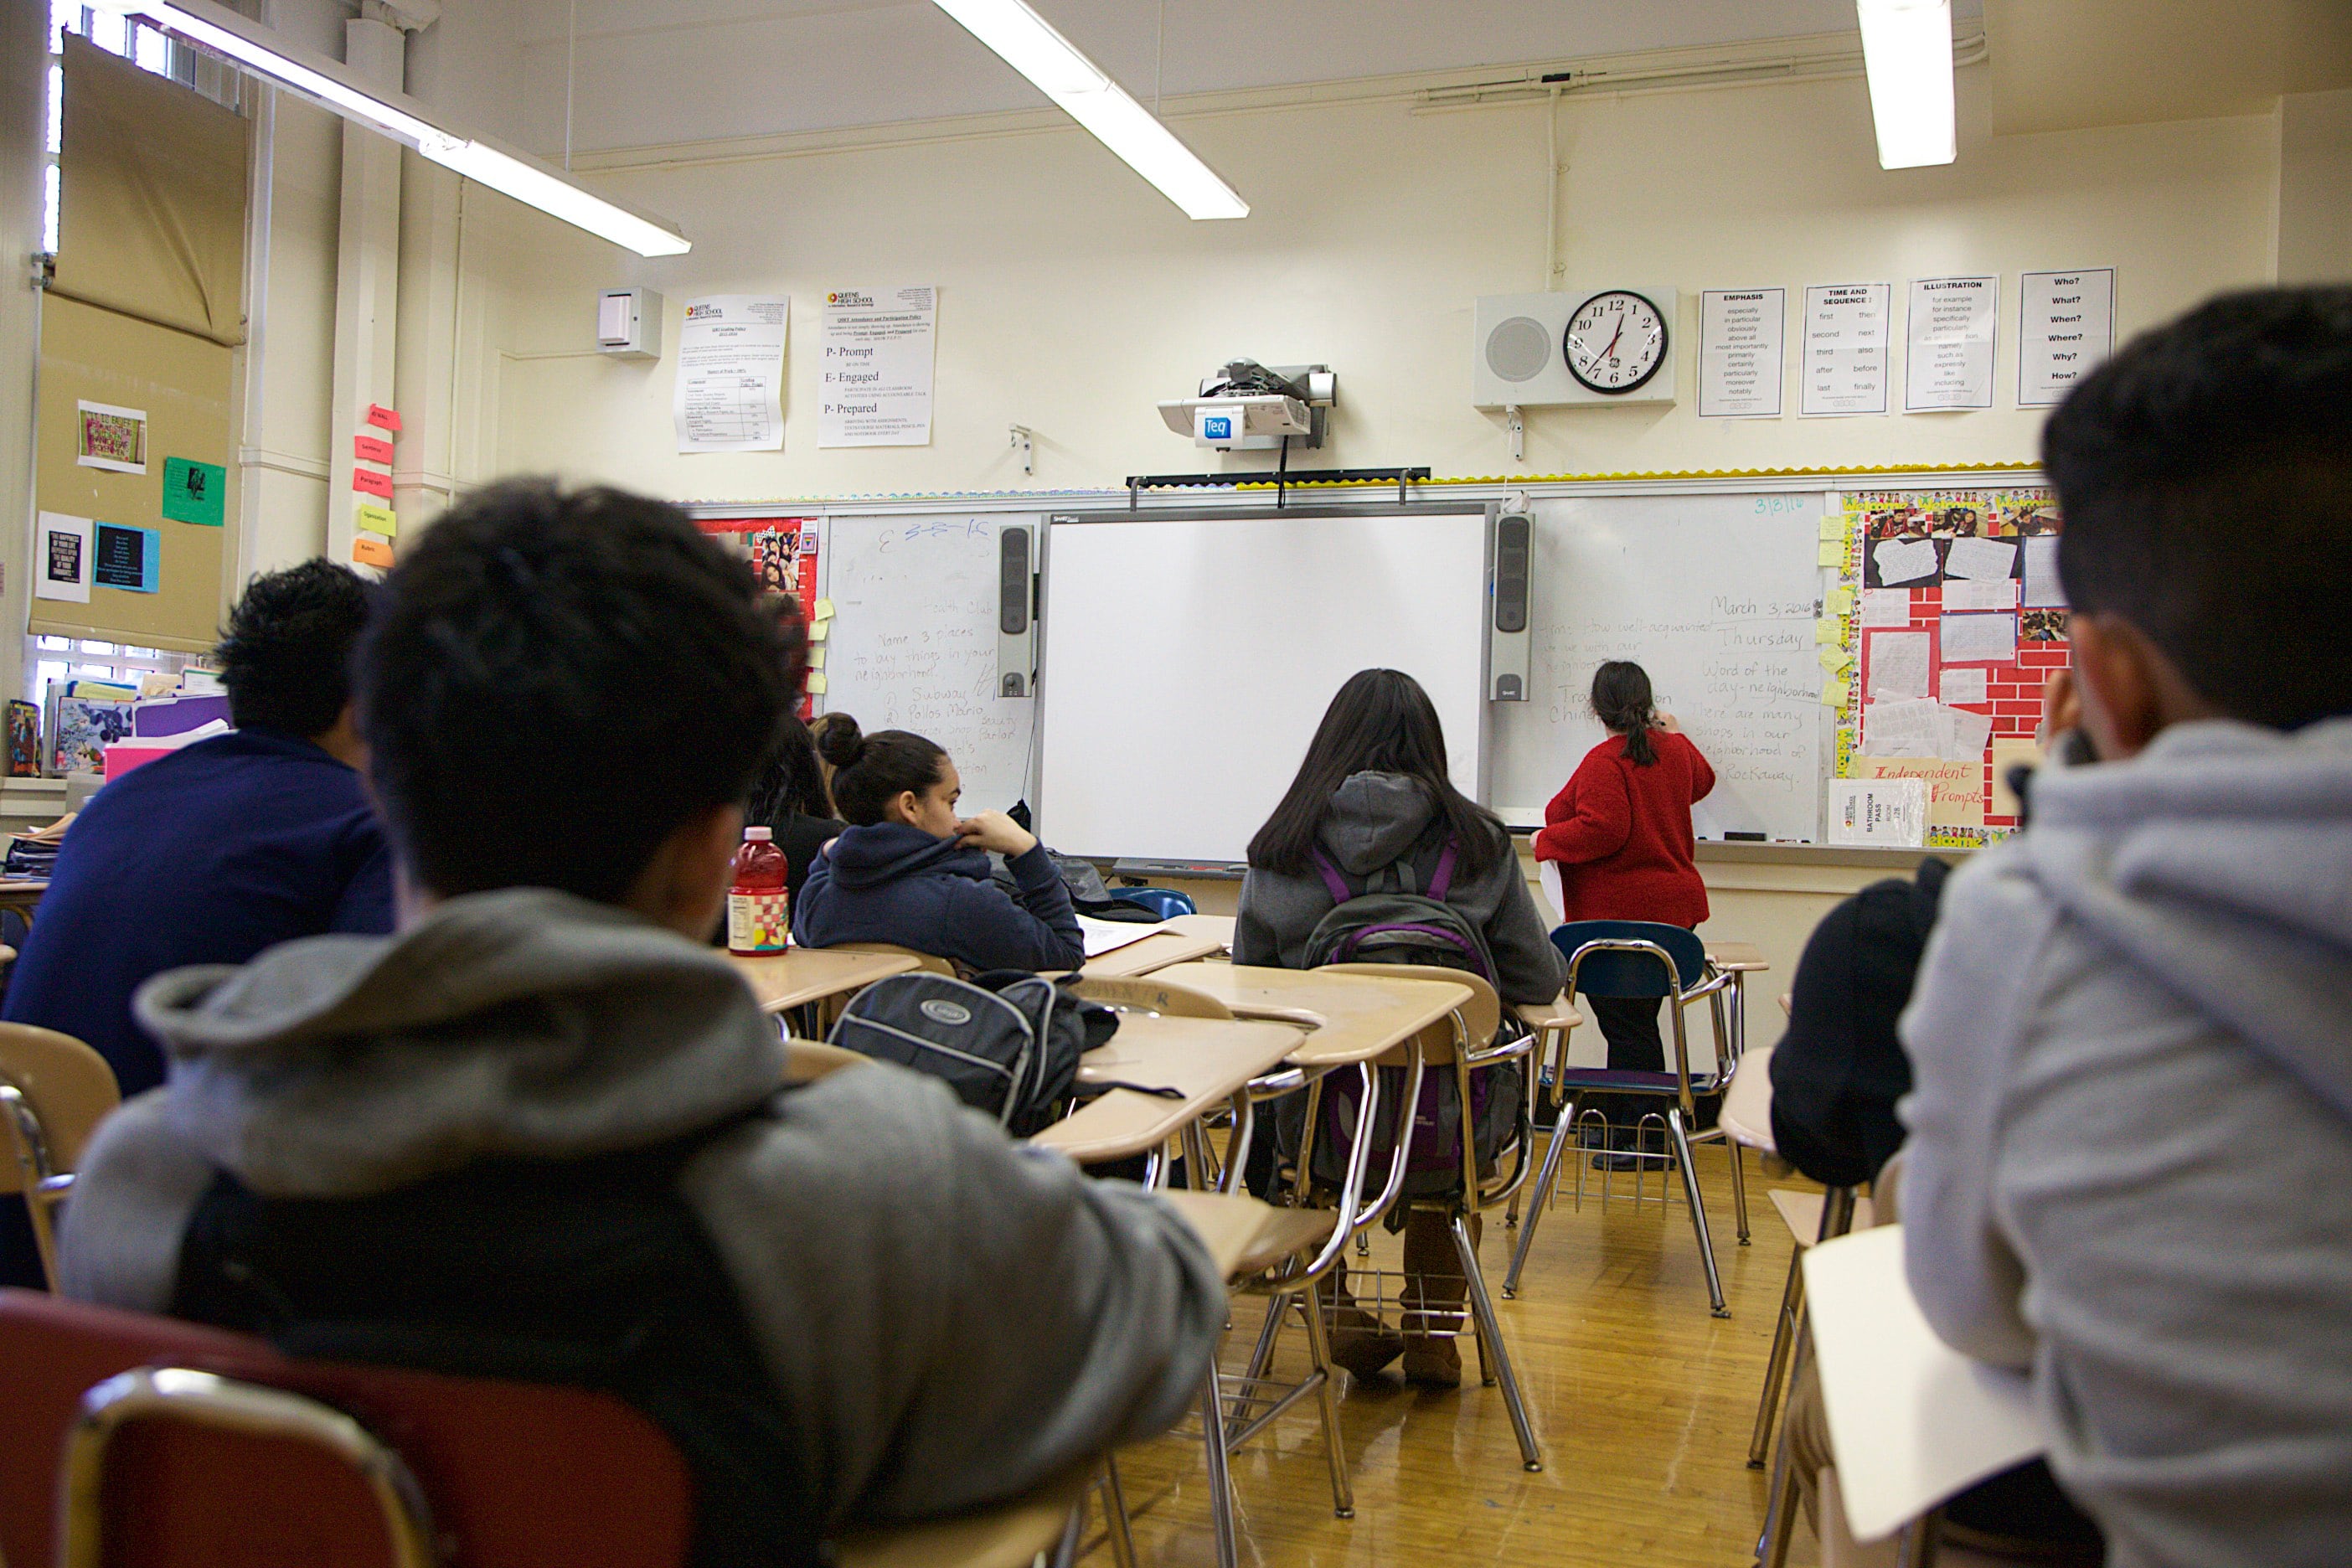 An ESL classroom at QIRT, where 26.2 percent of students are in an ESL program. The borough of Queens has the highest number of ELL students, at 29.9 percent.